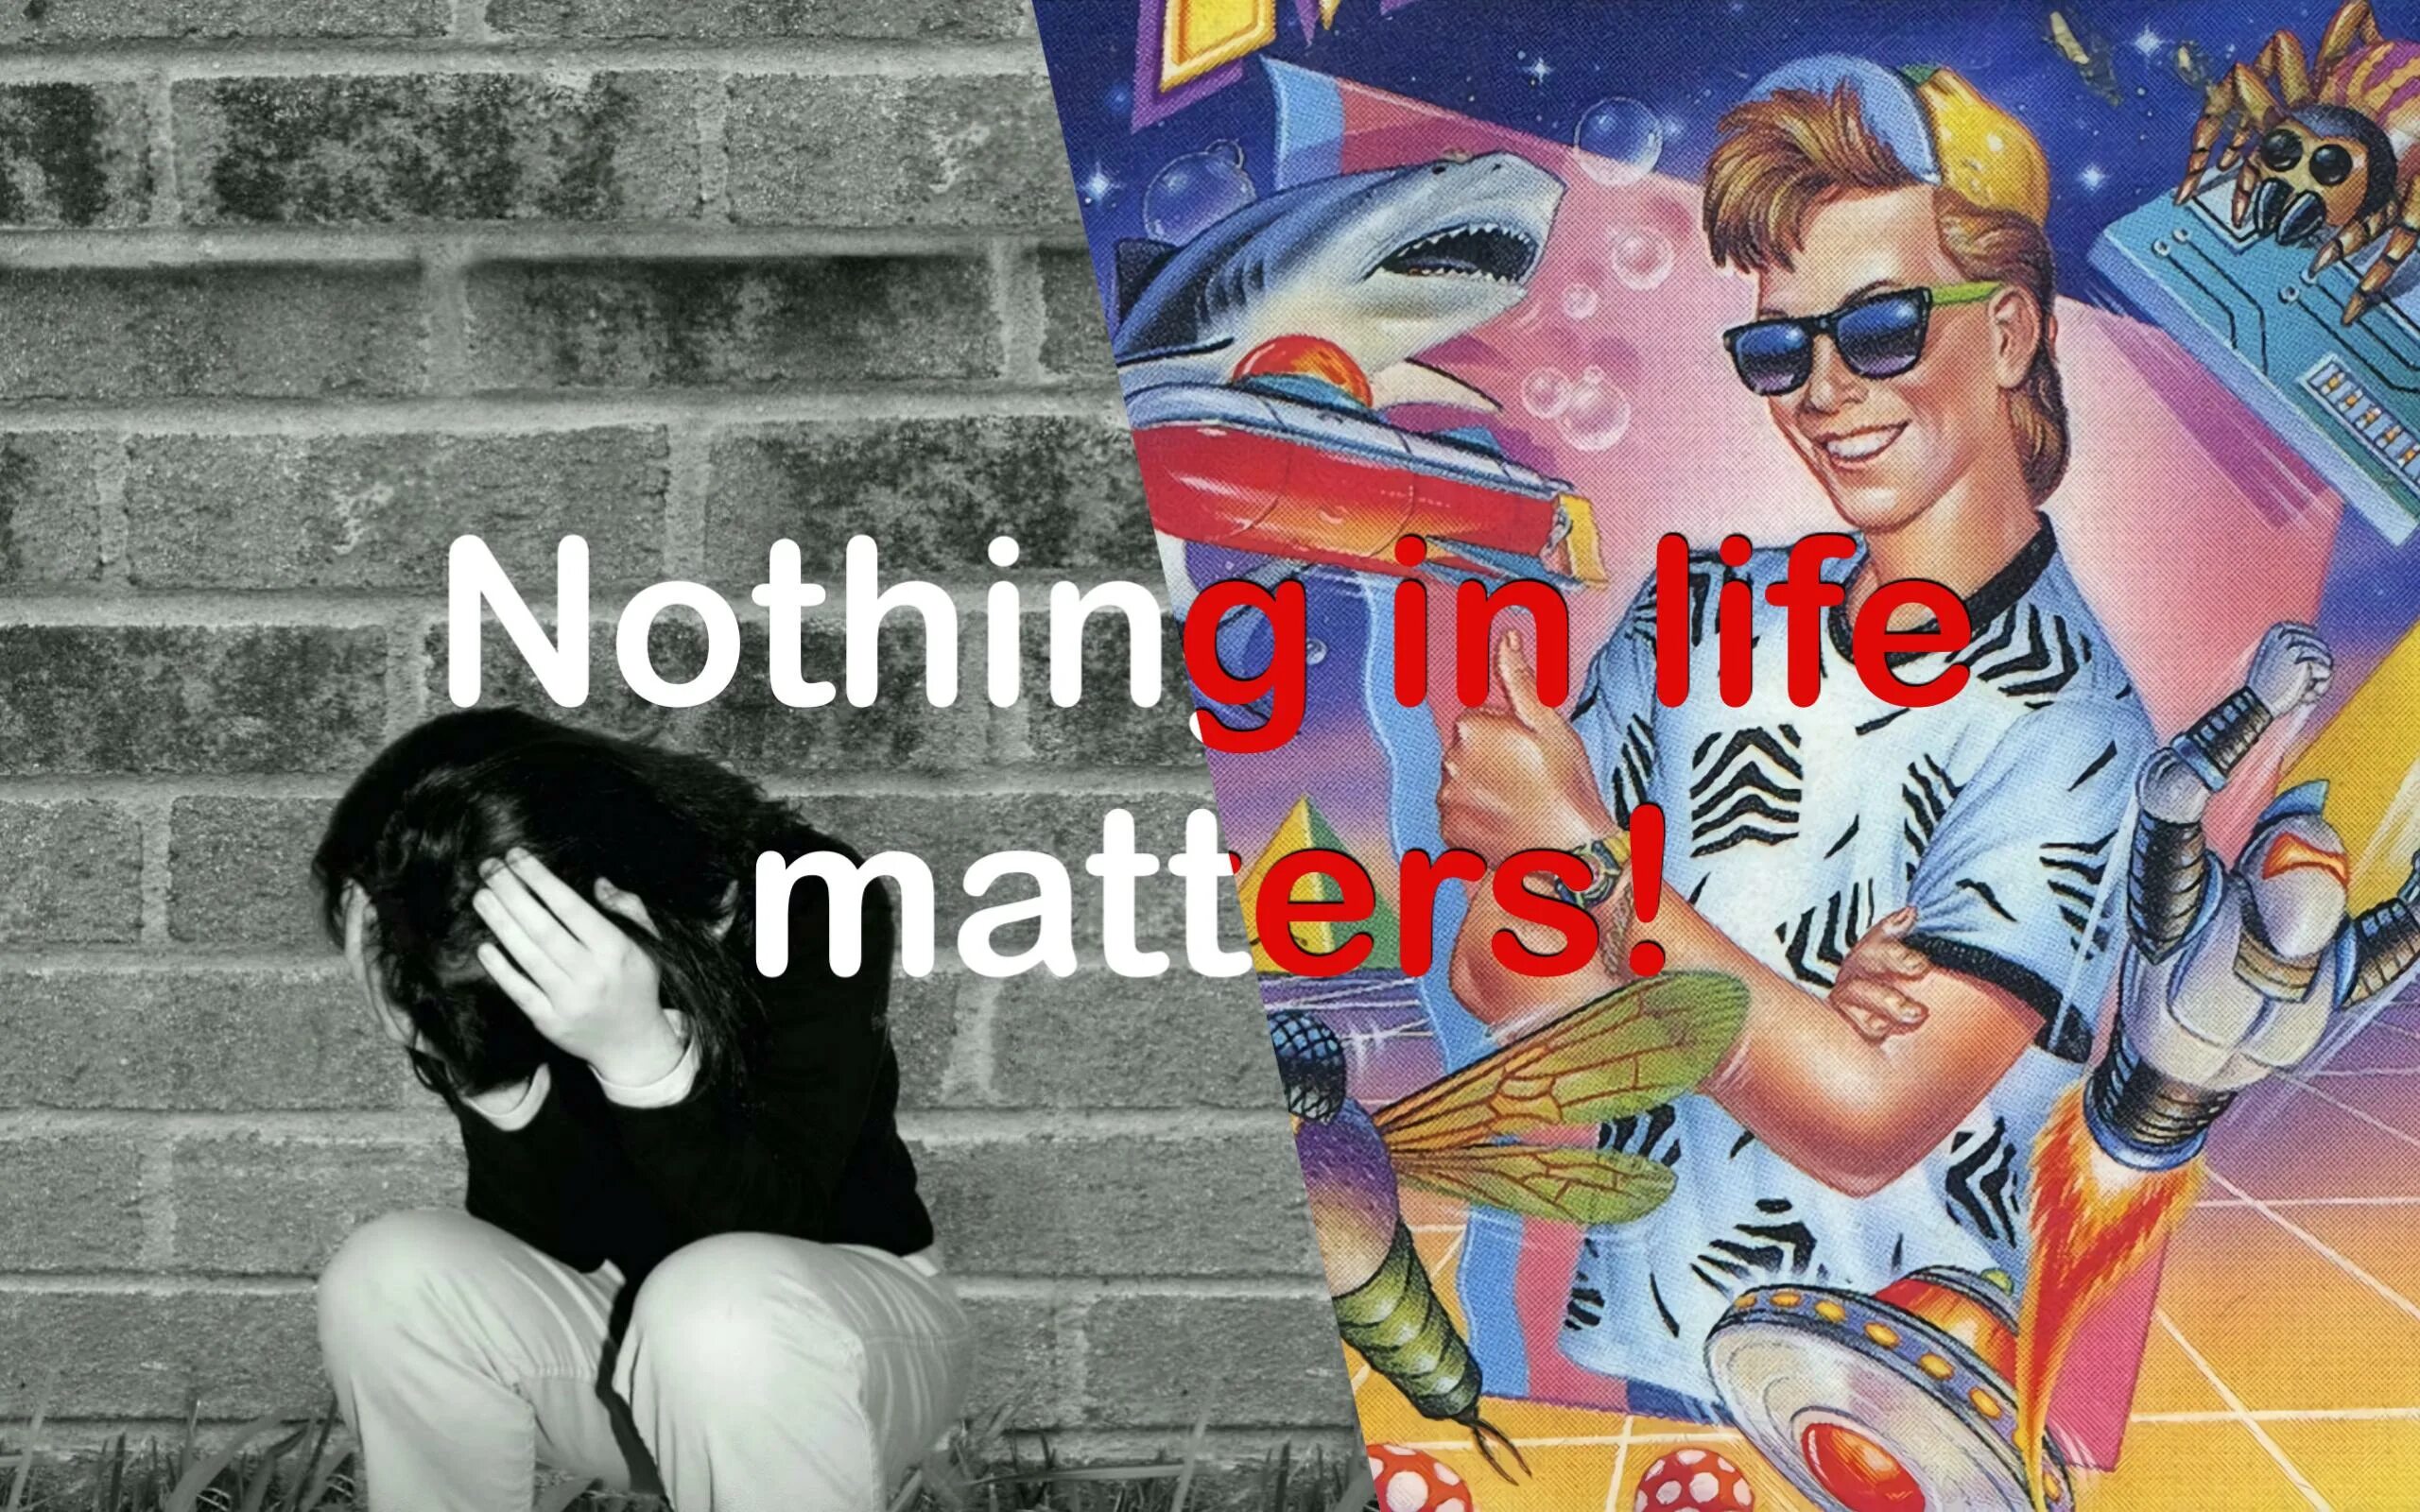 Nothing matters the last. Nothing in Life matters. Nothing in Life matters meme. Мемы экзистенциализм nothing in Life matters. In Life.